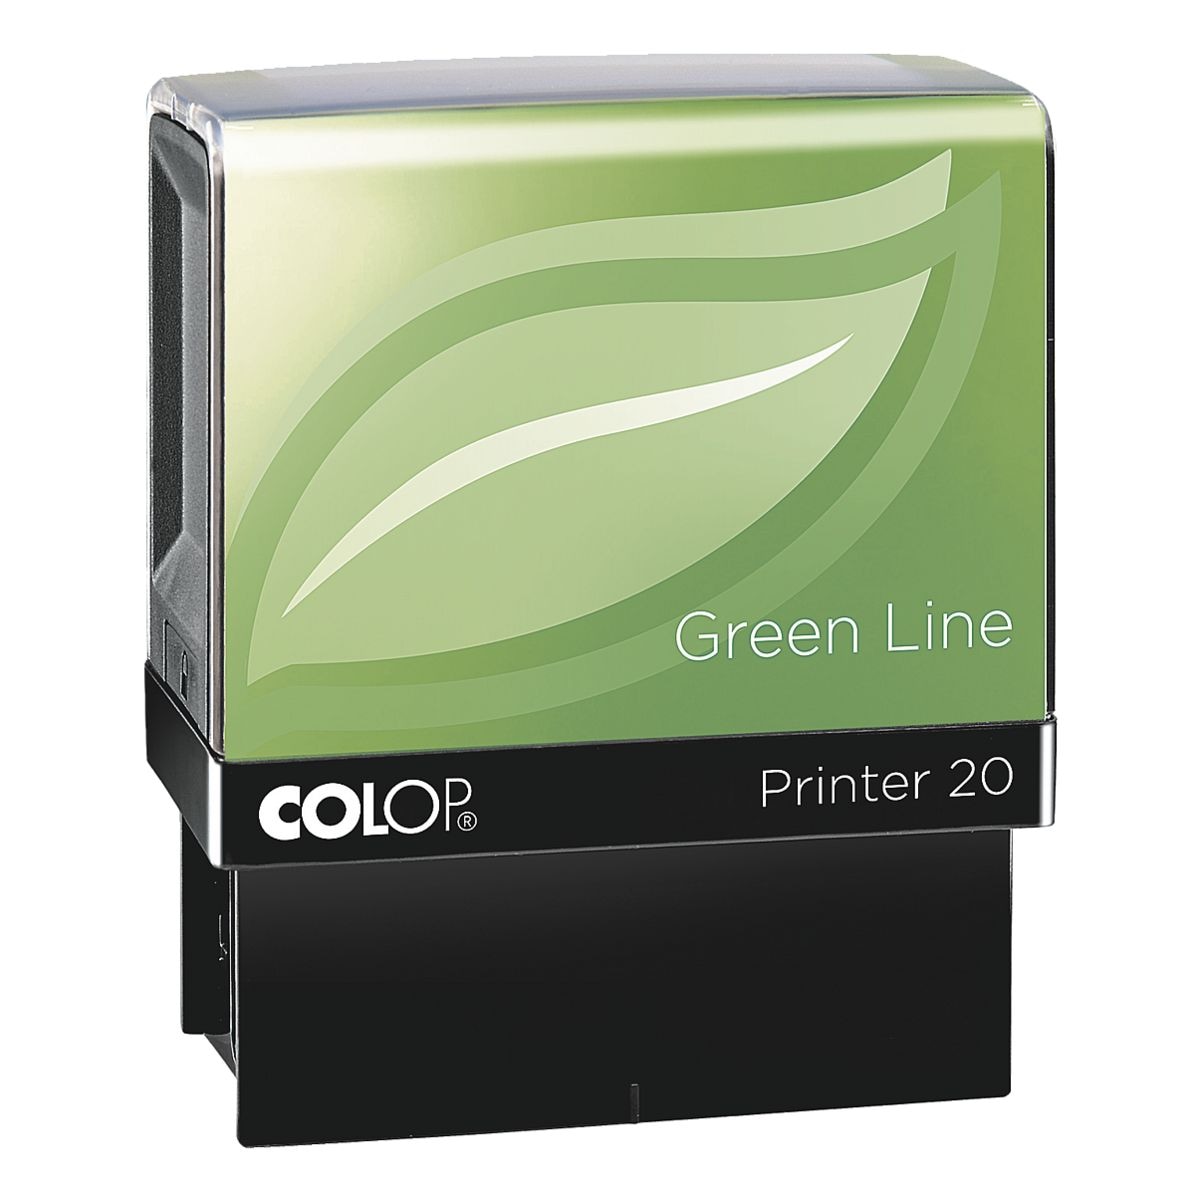 Colop Selbstfrbender Textstempel Printer 20 Green Line